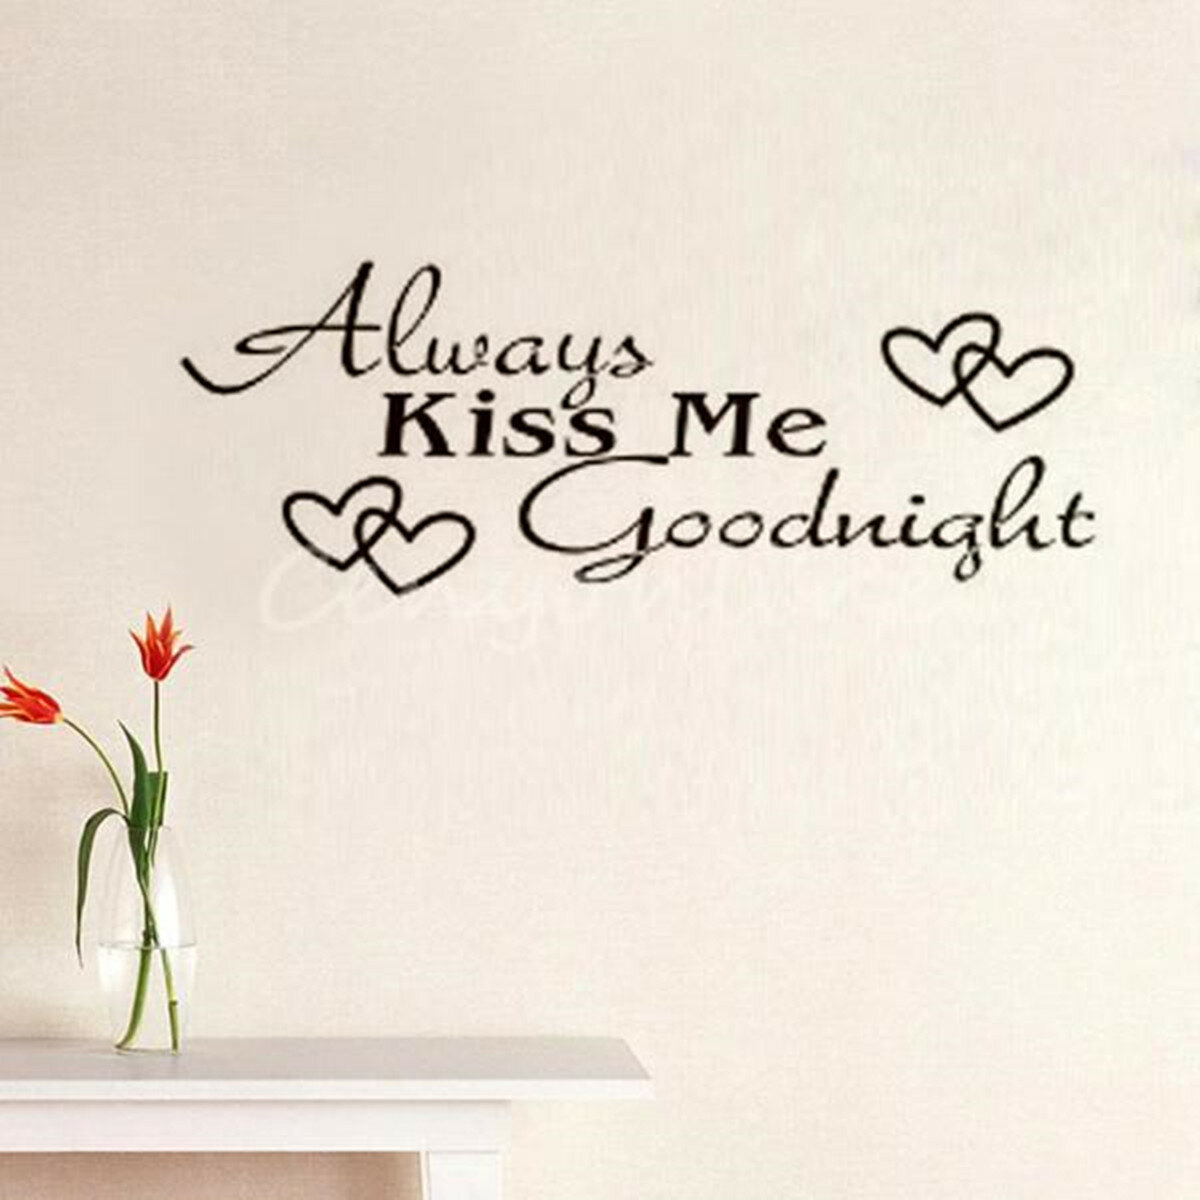 Waterproof Wall Sticker Always Kiss Me Vinyl Removable Wall Decorative Paper for Home Office DIY Wall Decoration